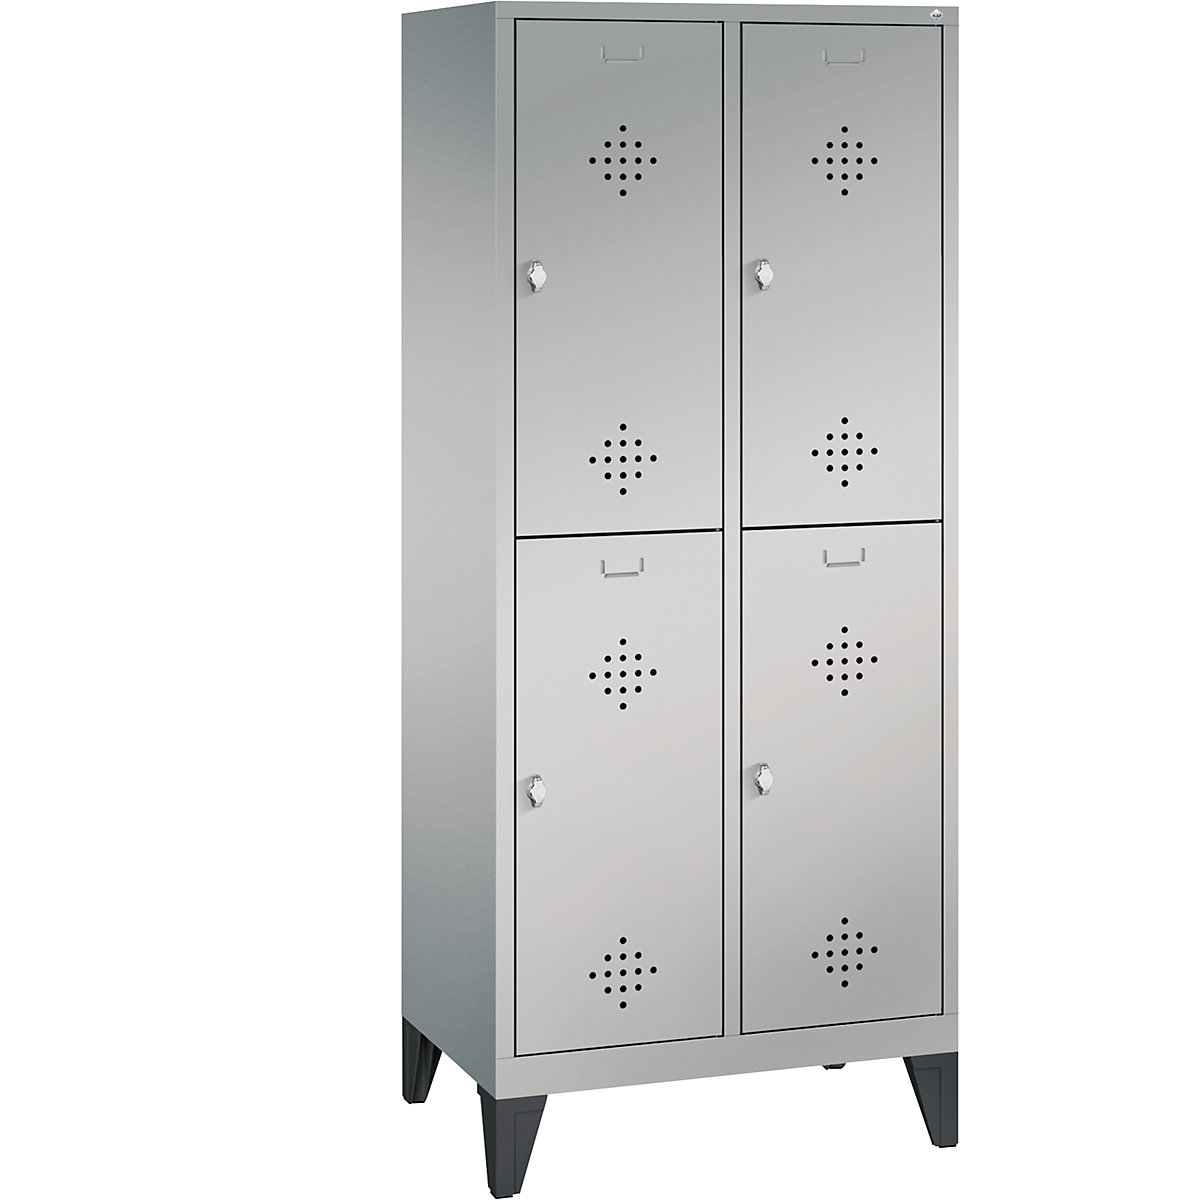 CLASSIC cloakroom locker with feet, double tier – C+P, 2 compartments, 2 shelf compartments each, compartment width 400 mm, white aluminium-5